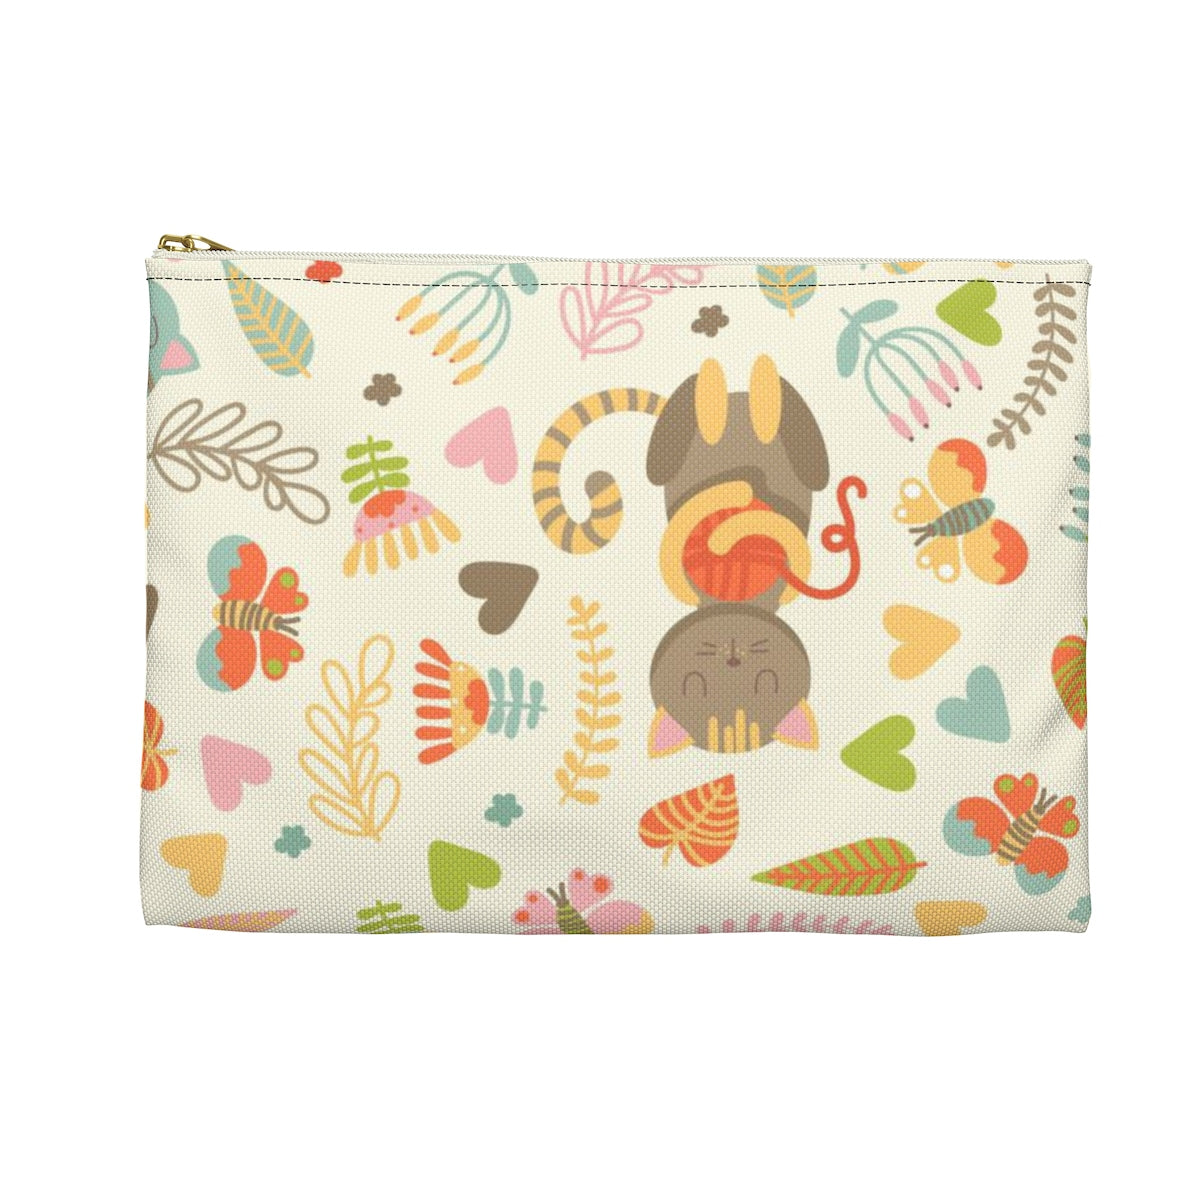 A Cat's Life - Accessory Pouch